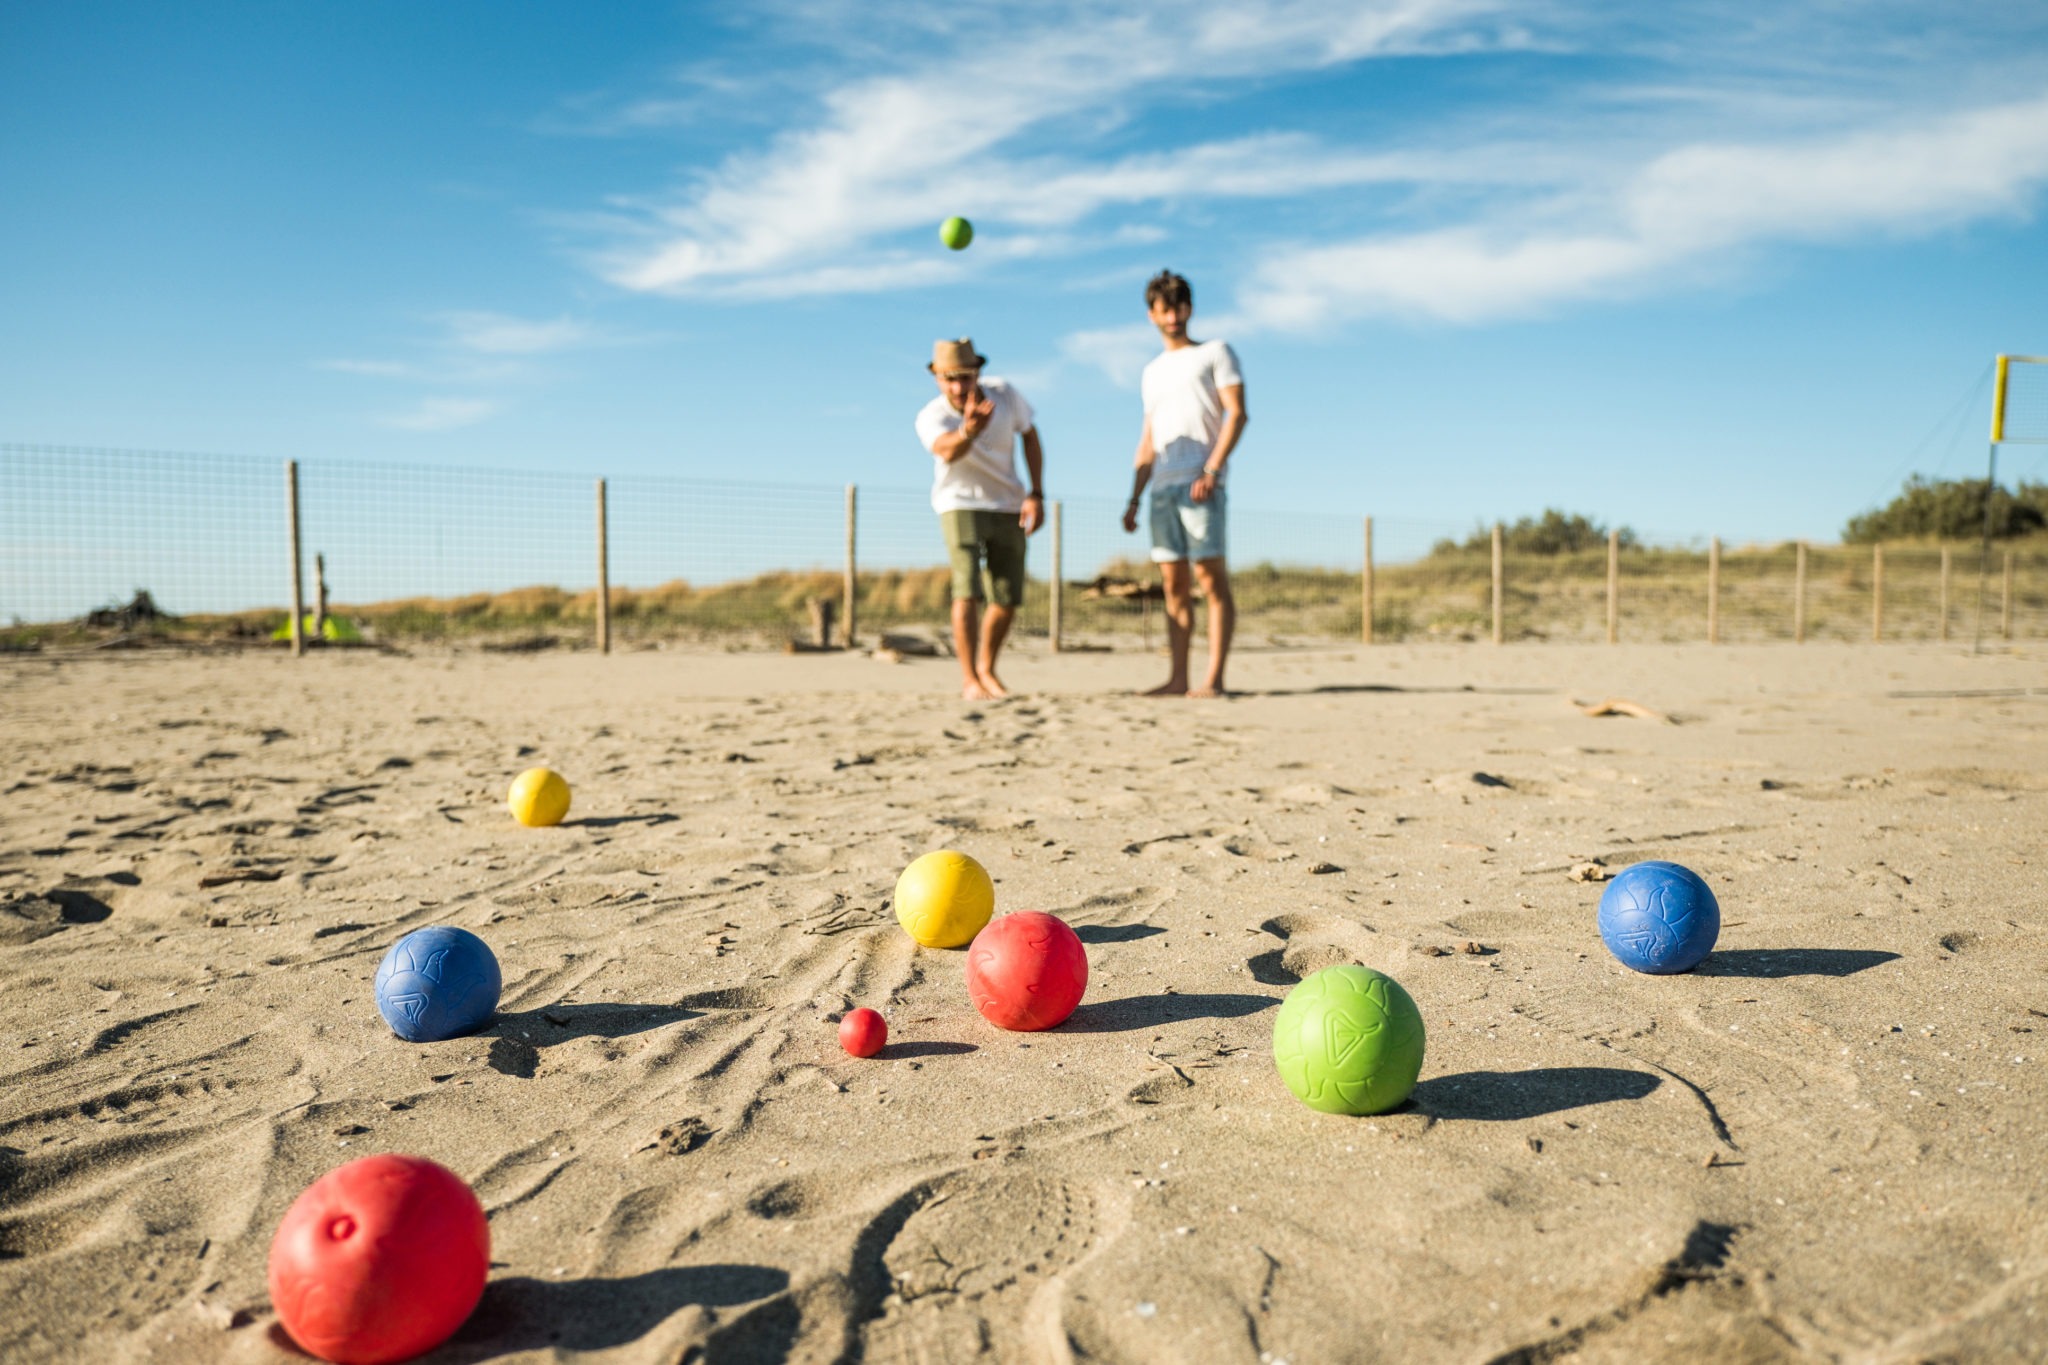 Tourists play an active game, petanque on a sandy beach by the sea - Group of young people playing boule outdoors in beach holidays - Balls on the ground